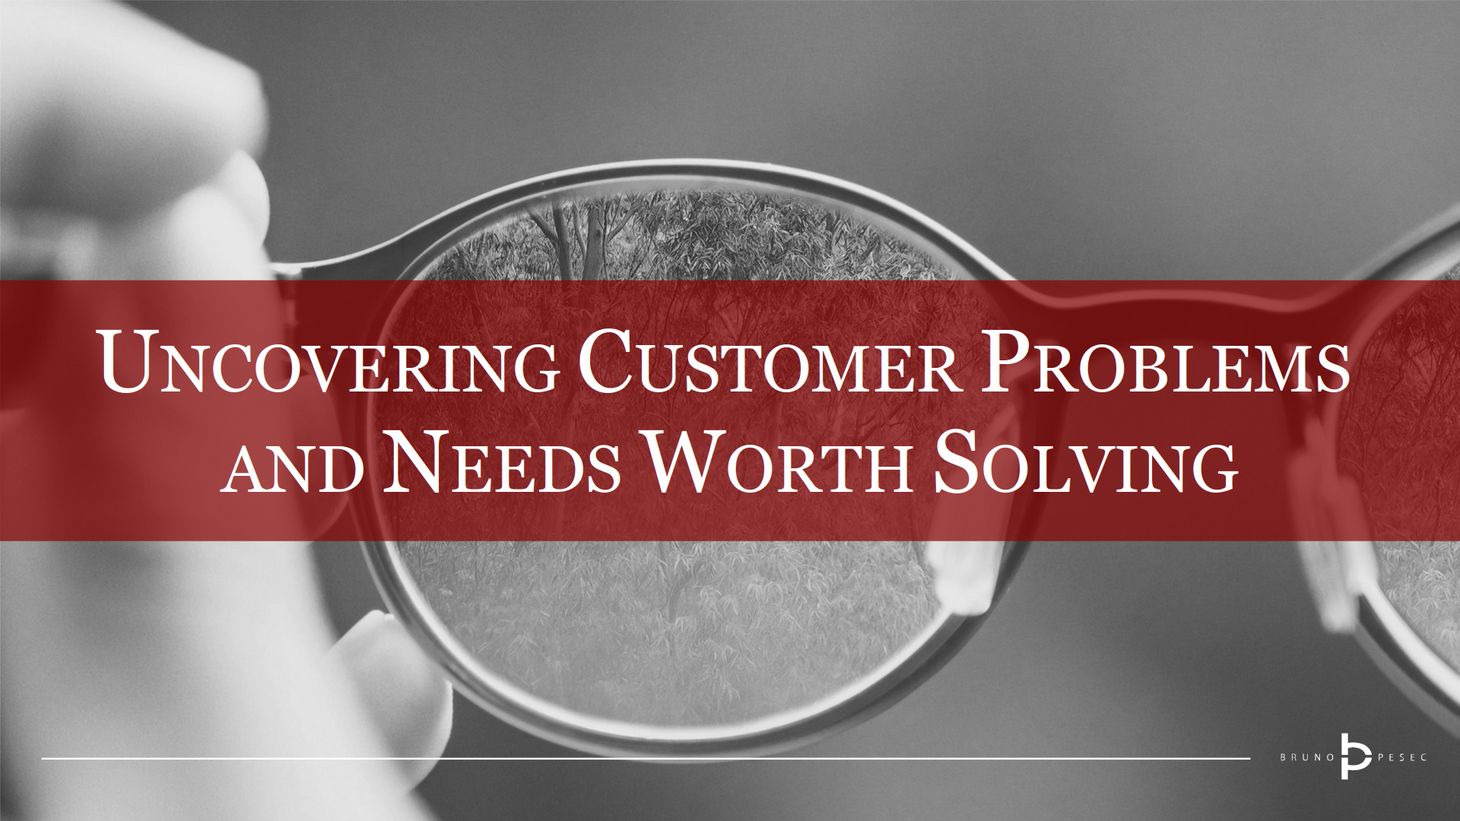 On uncovering customer problems and needs worth solving